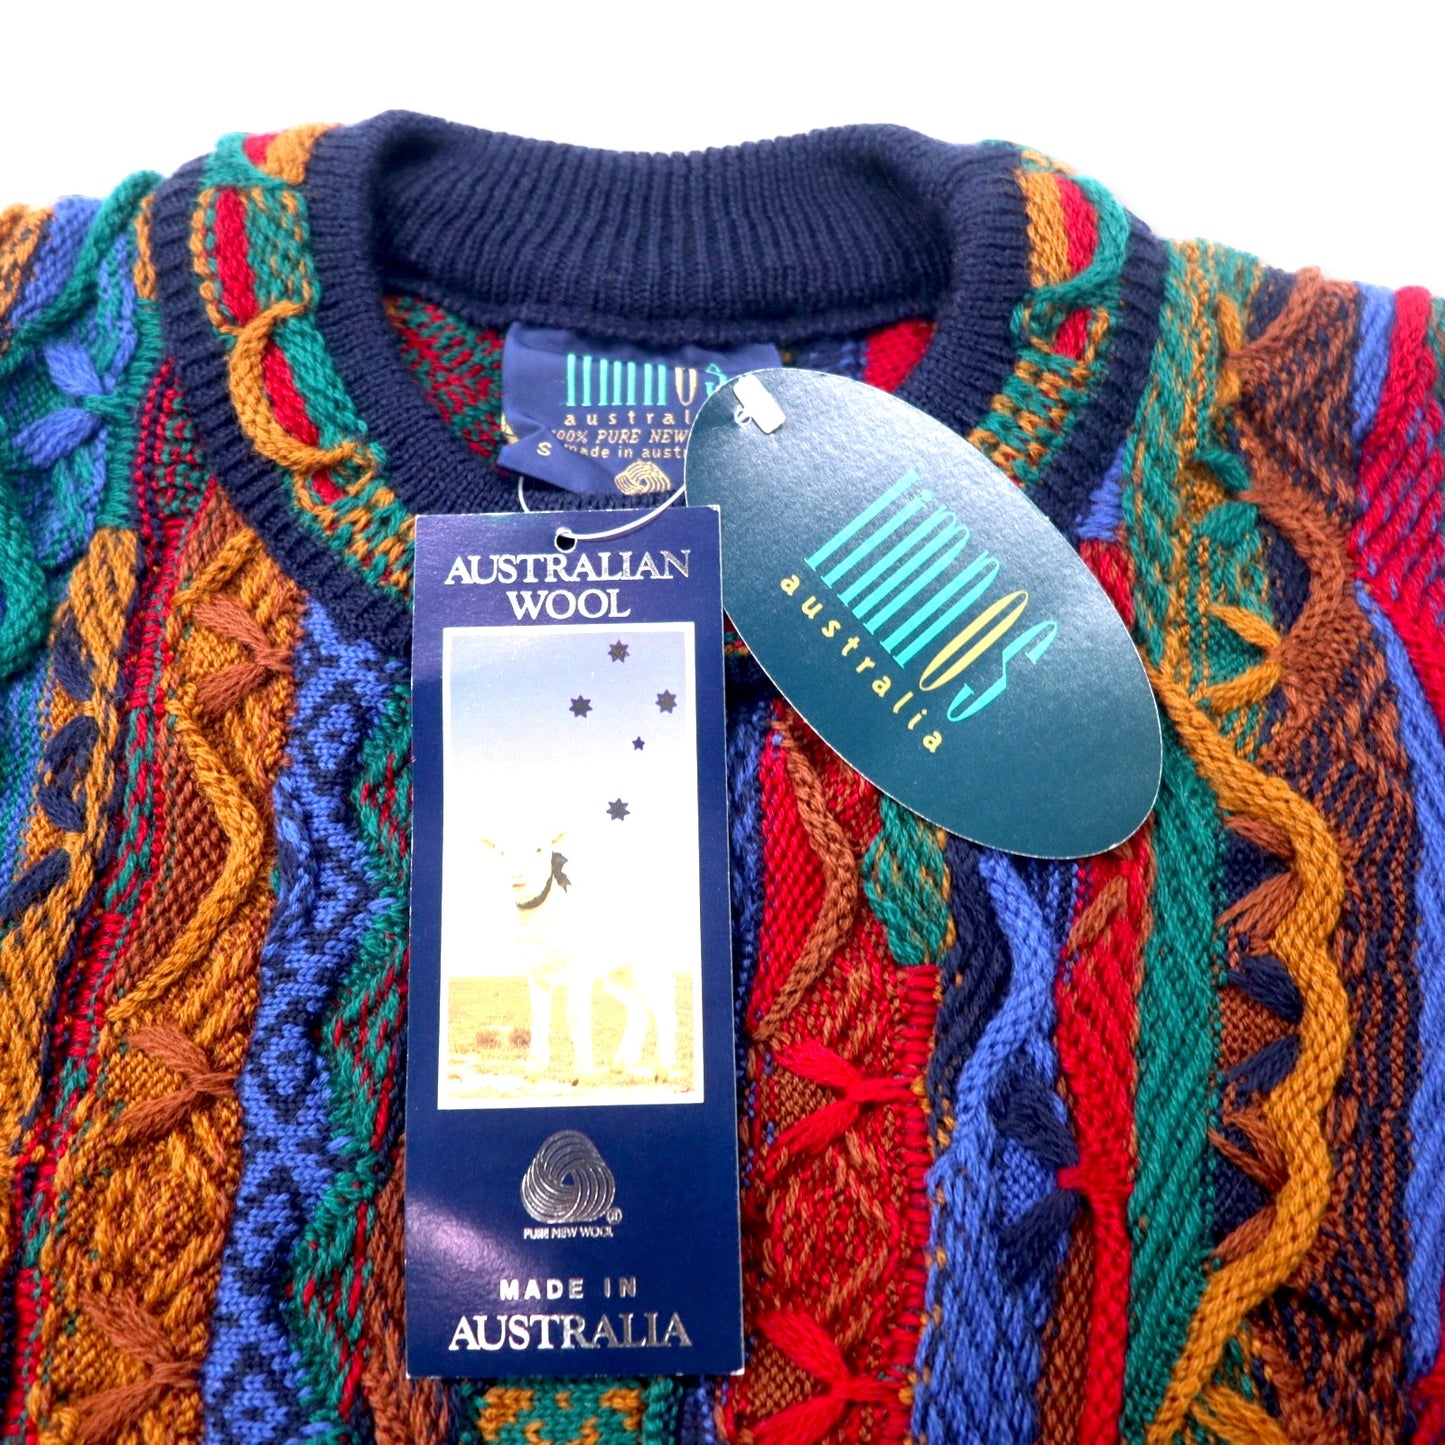 Limnos 90s Australia MADE 3D Knit Sweater S Multi Color Wool 